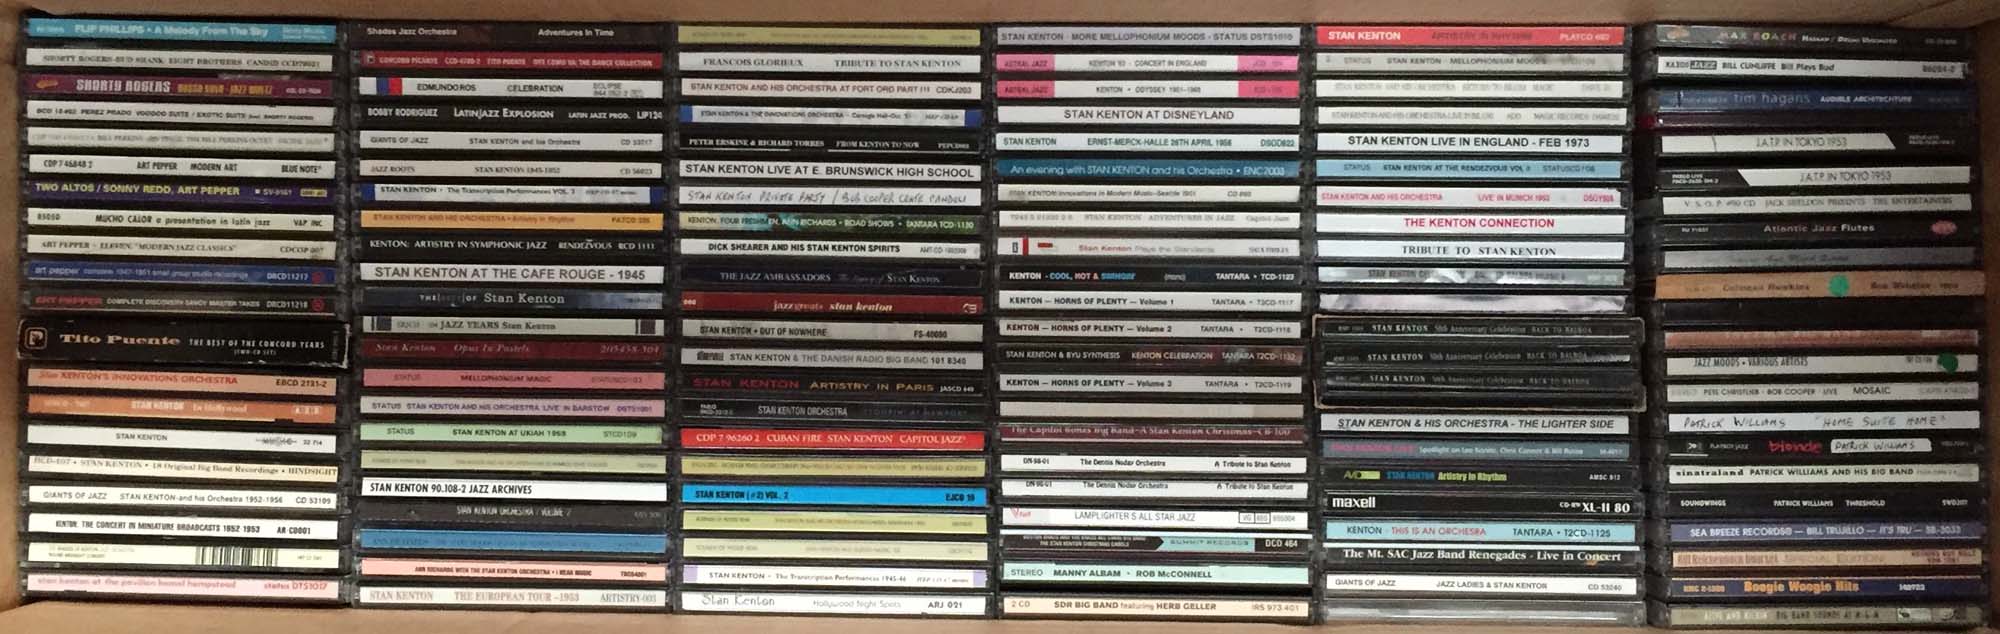 400 +JAZZ CDS. Excellent selection of Jazz CDs, with some box sets likely included. - Image 3 of 13